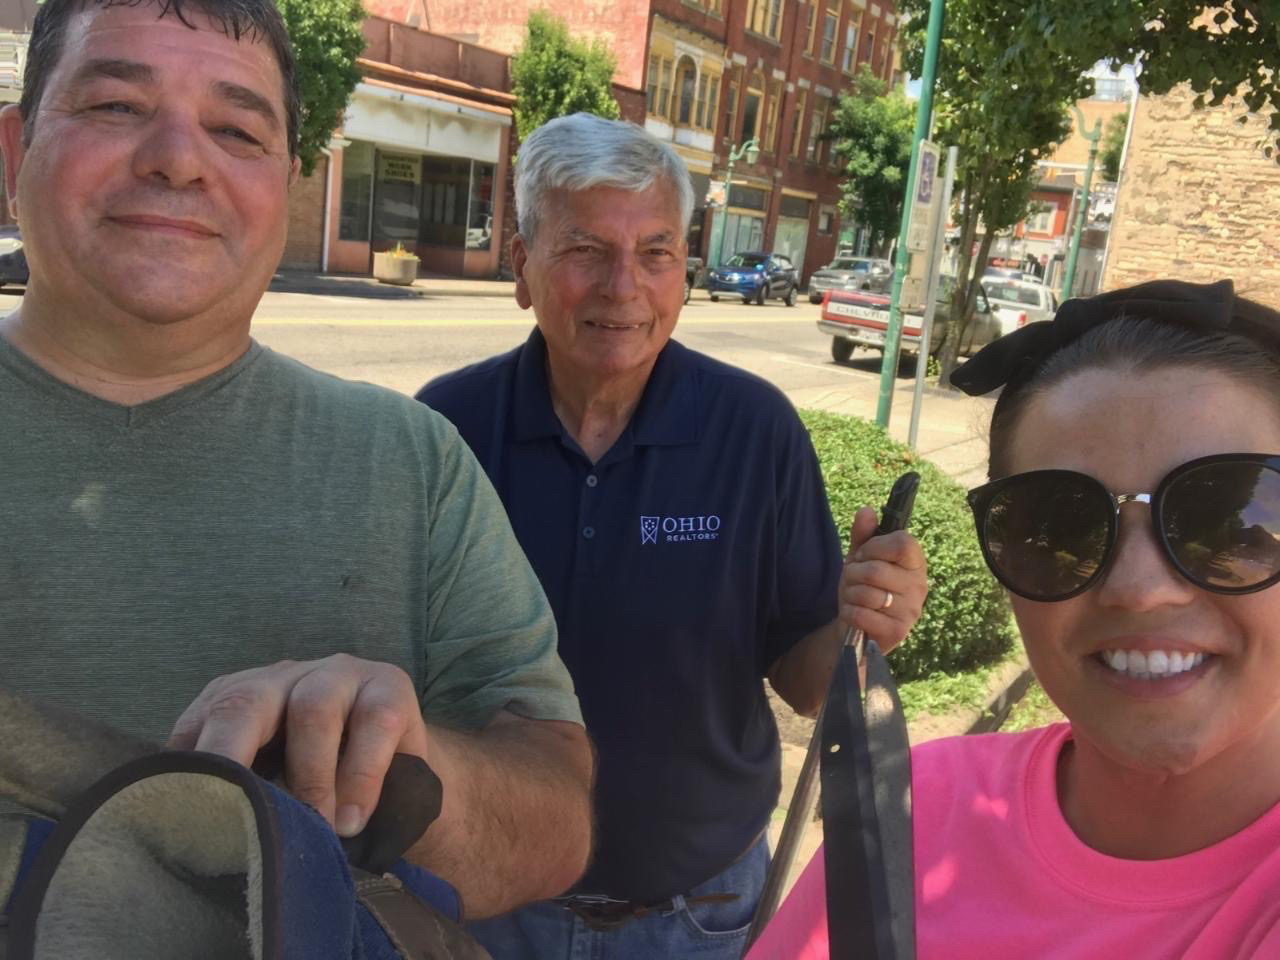 REALTORS support East Liverpool's downtown clean up day--June 20, 2020.  Pictured are Broker Ron Bryer of Bryer Realty, Dale Meller, Association Executive of Beaver Creek Area Association of REALTORS, and REALTOR Ashley Martin of Keller Williams Realty.